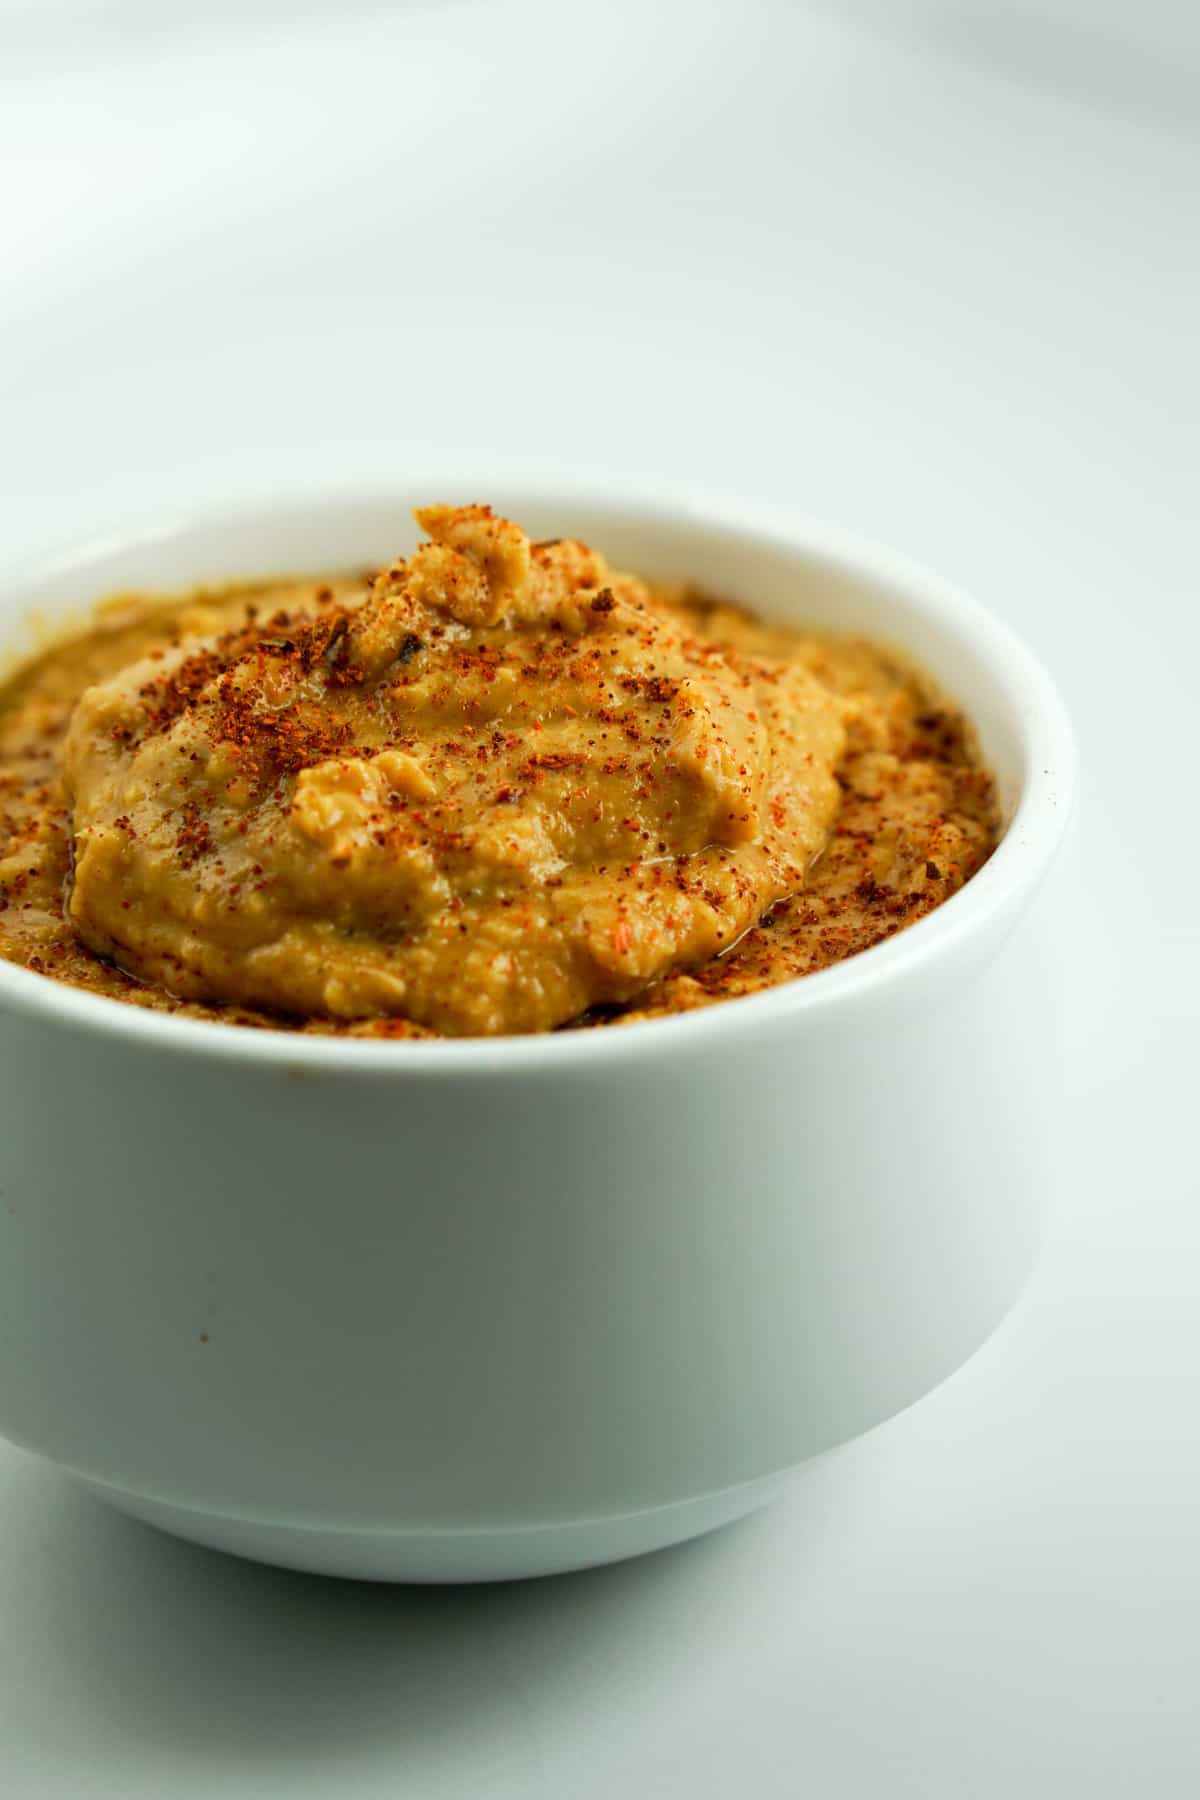 homemade hummus with paprika dusted on top in a white ramekin with white background